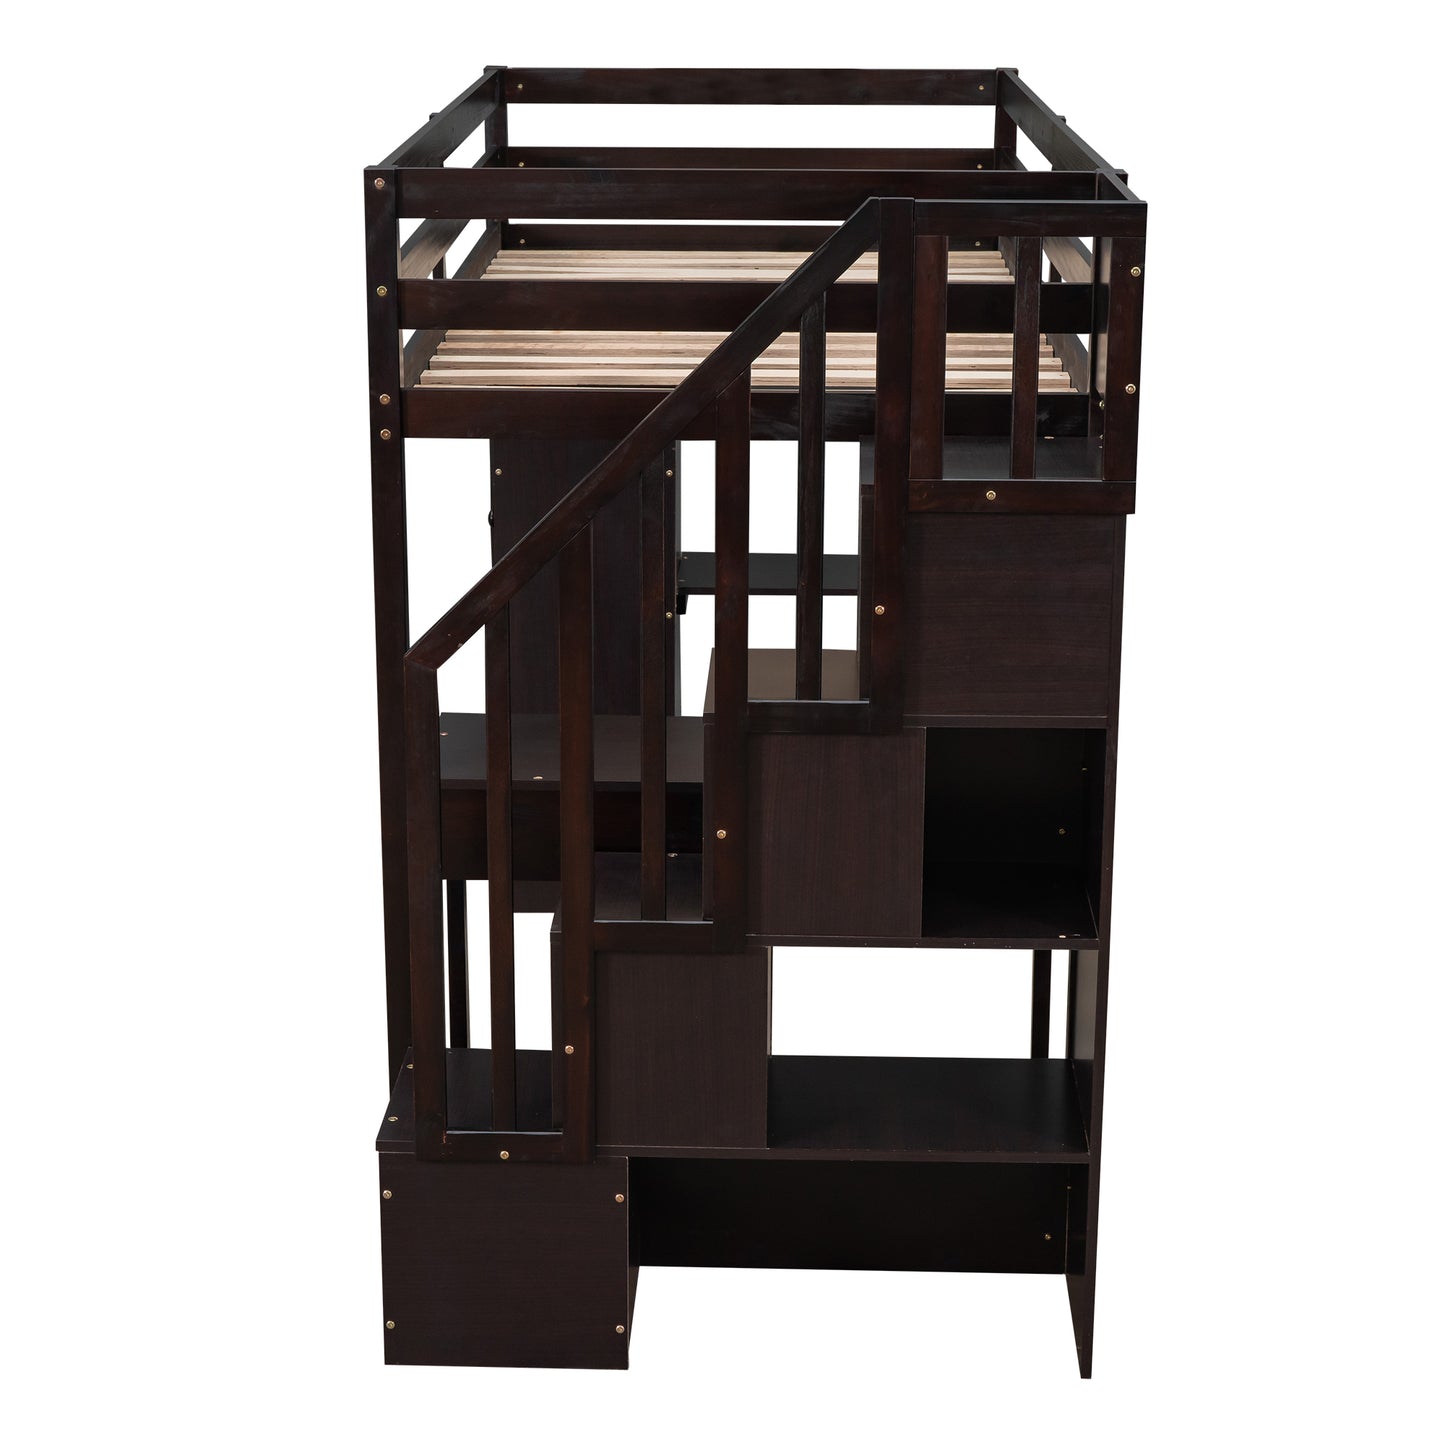 Twin size Loft Bed with Storage Drawers ,Desk and Stairs, Wooden Loft Bed with Shelves - Espresso